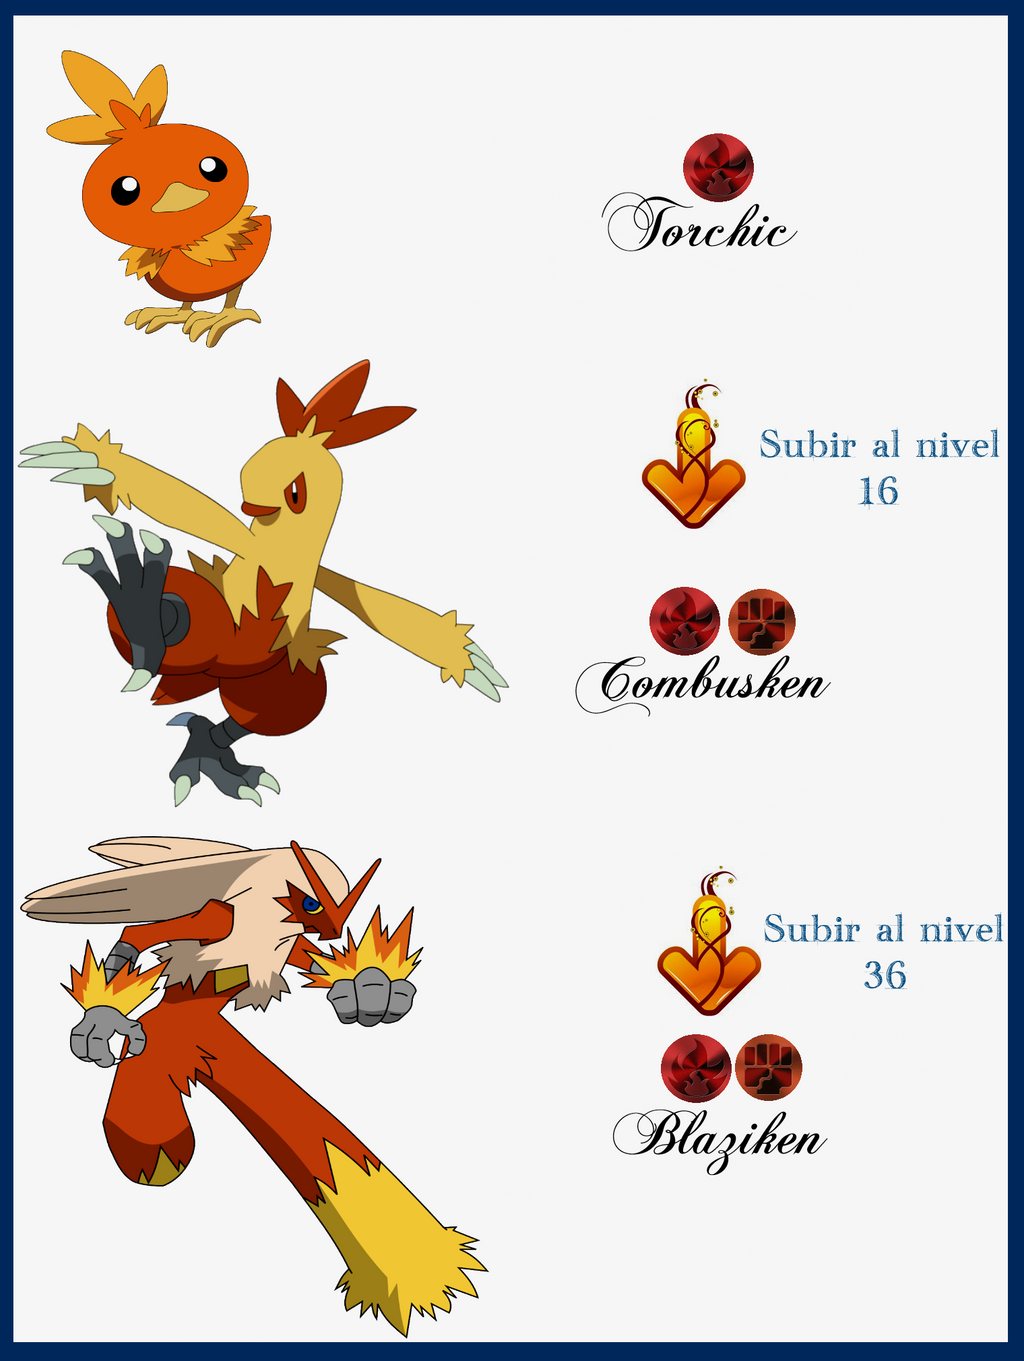 At what level does Torchic evolve?